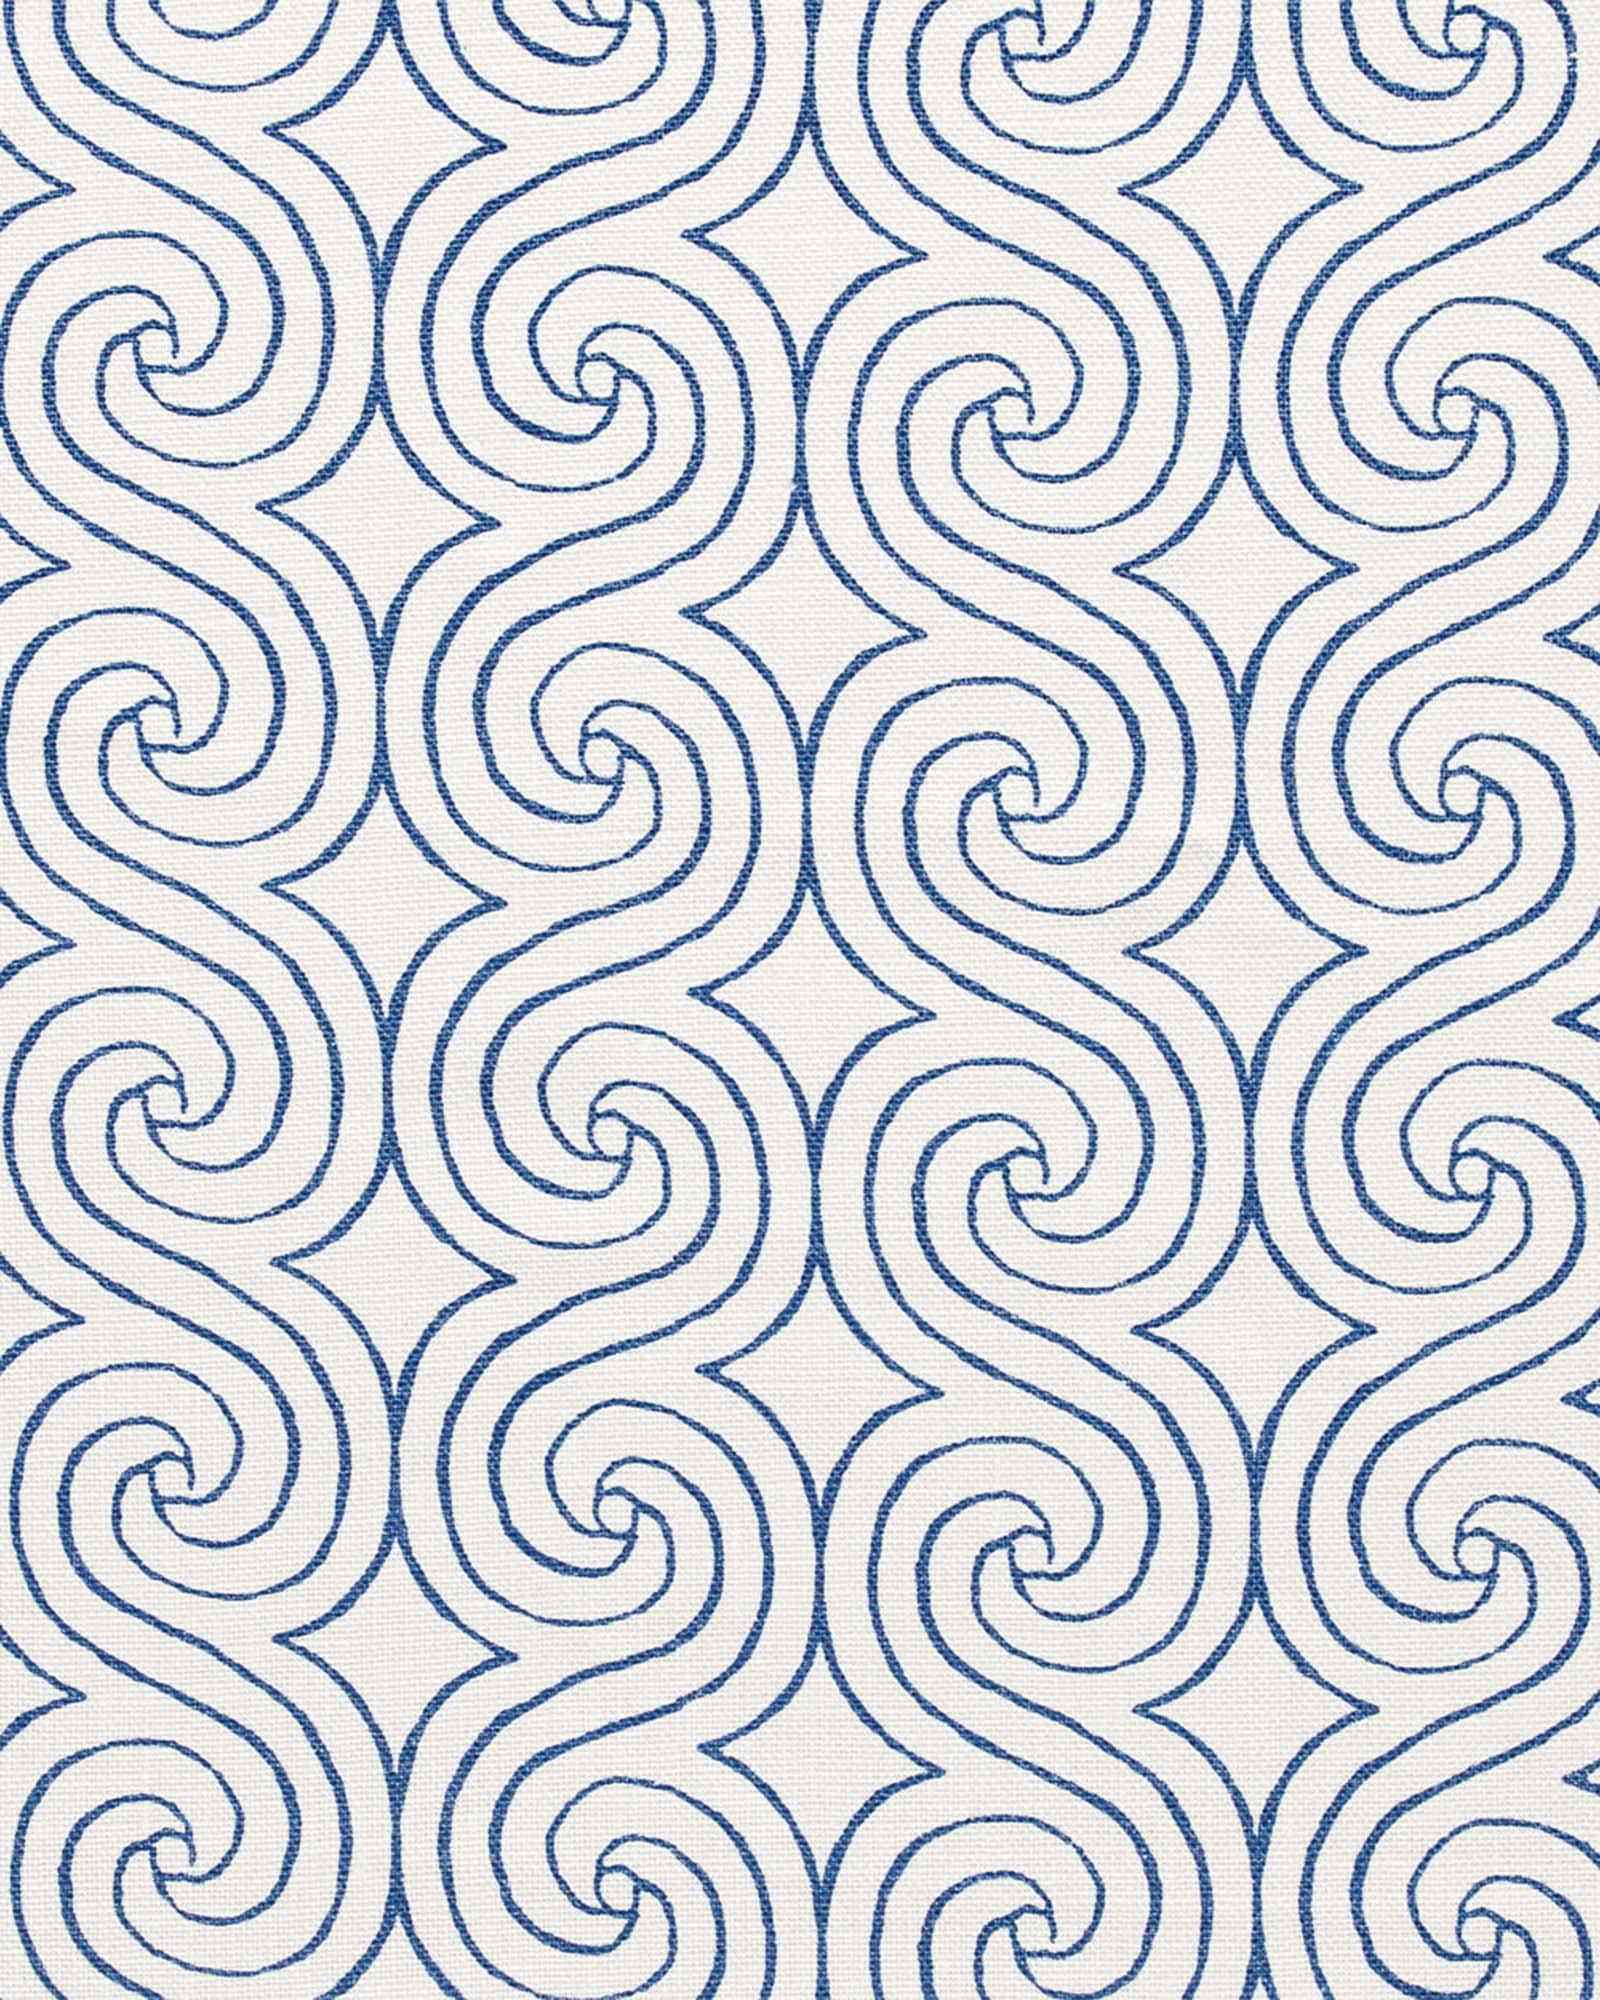 Fabric by The Yard - Swirl Linen in French Blue | Serena & Lily